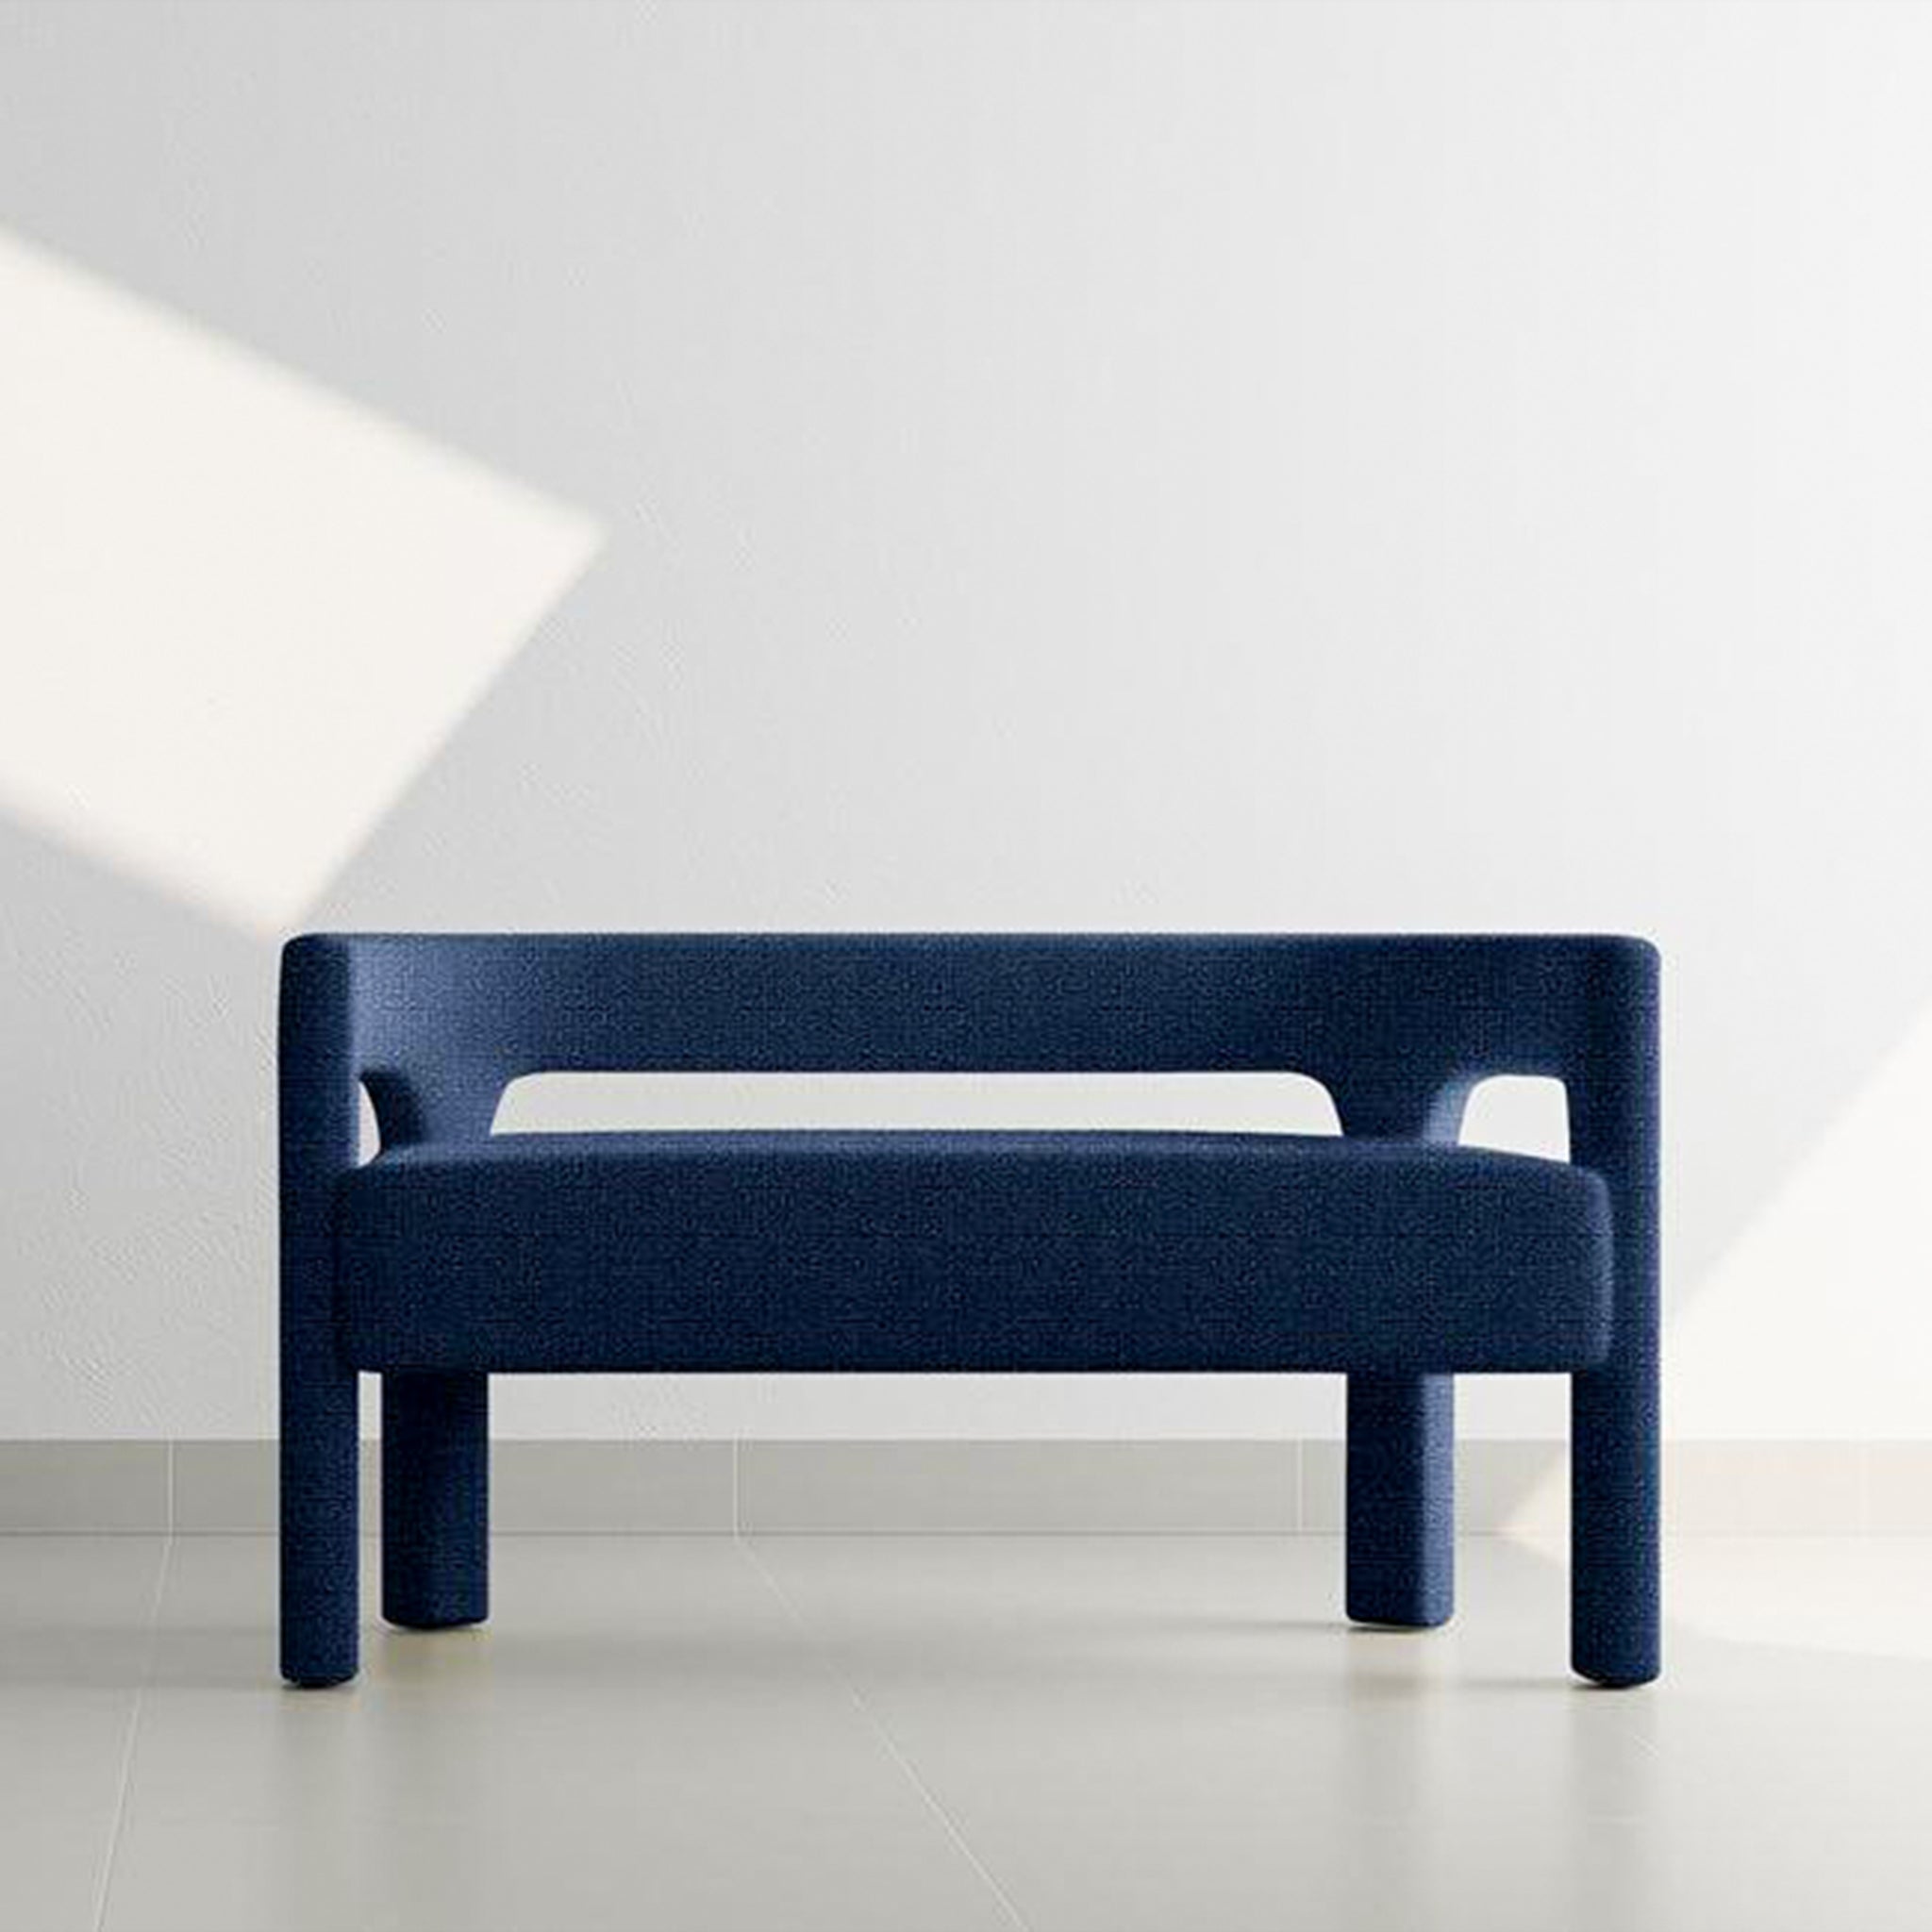 Front view of a stylish blue two-seater sofa in a modern, minimalist room with soft natural light